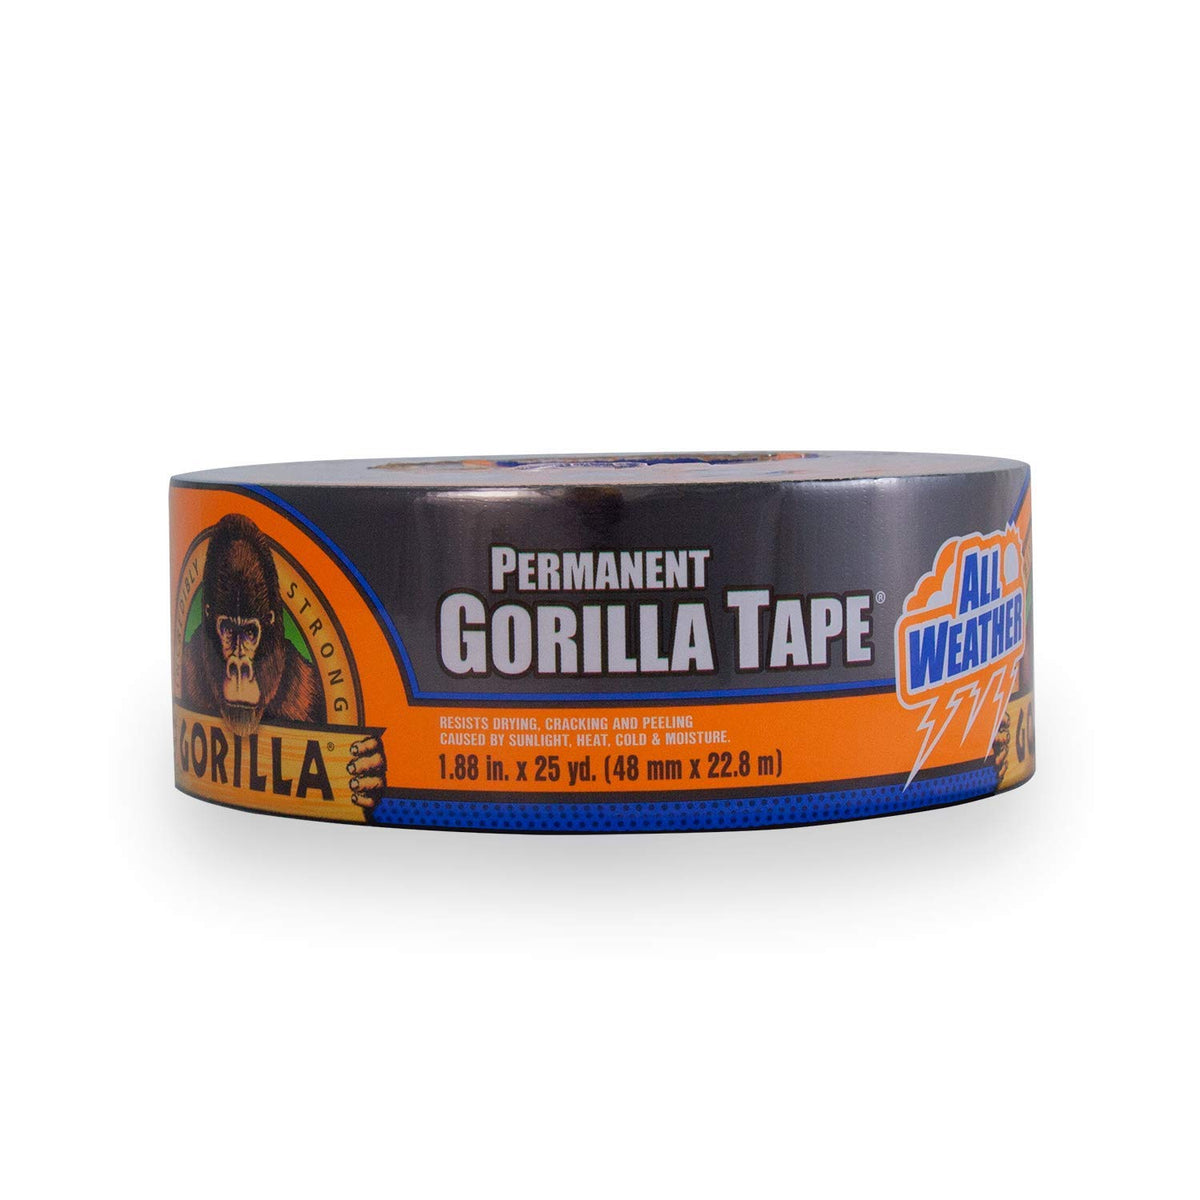 Gorilla 6009002 All Weather Permanent Tape, 1.88" x 25 Yd